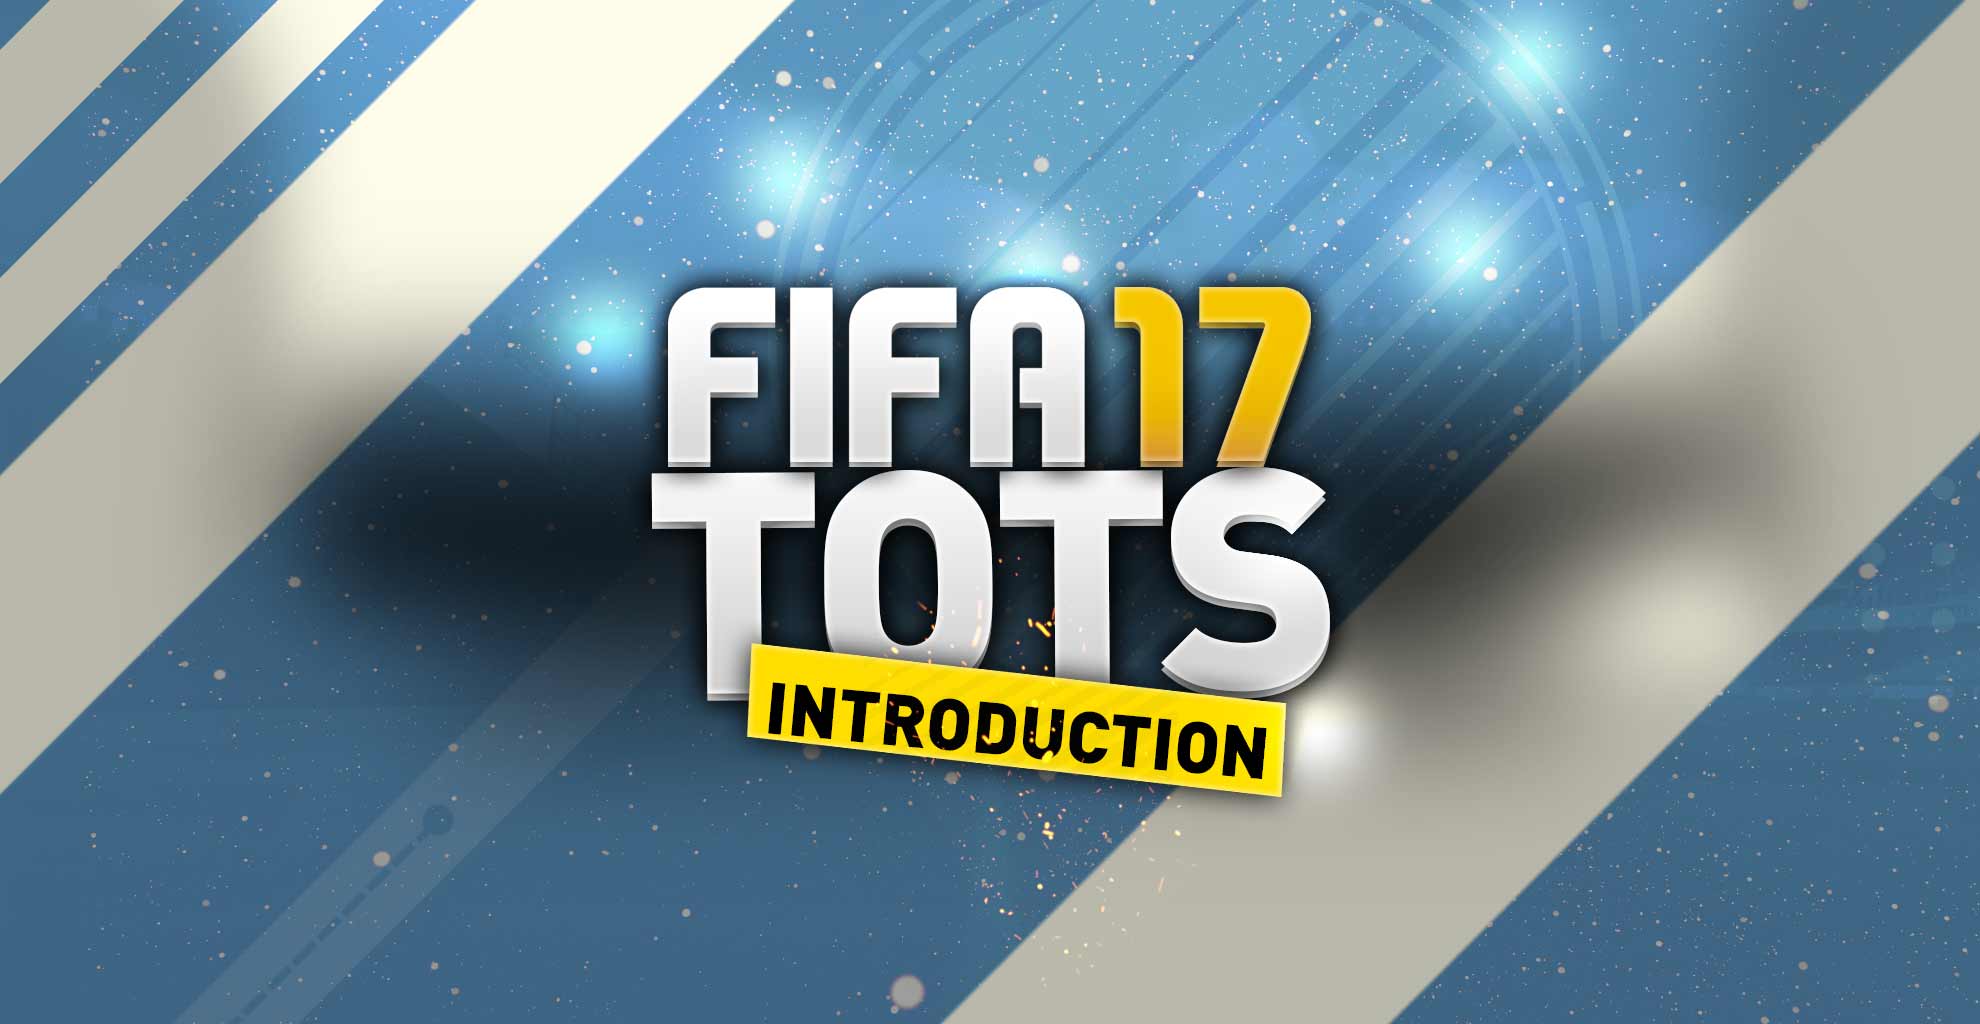 fleksibel Centrum Rullesten FIFA 17 Team of the Season Guide - TOTS Release Date, Squads, FAQ and More